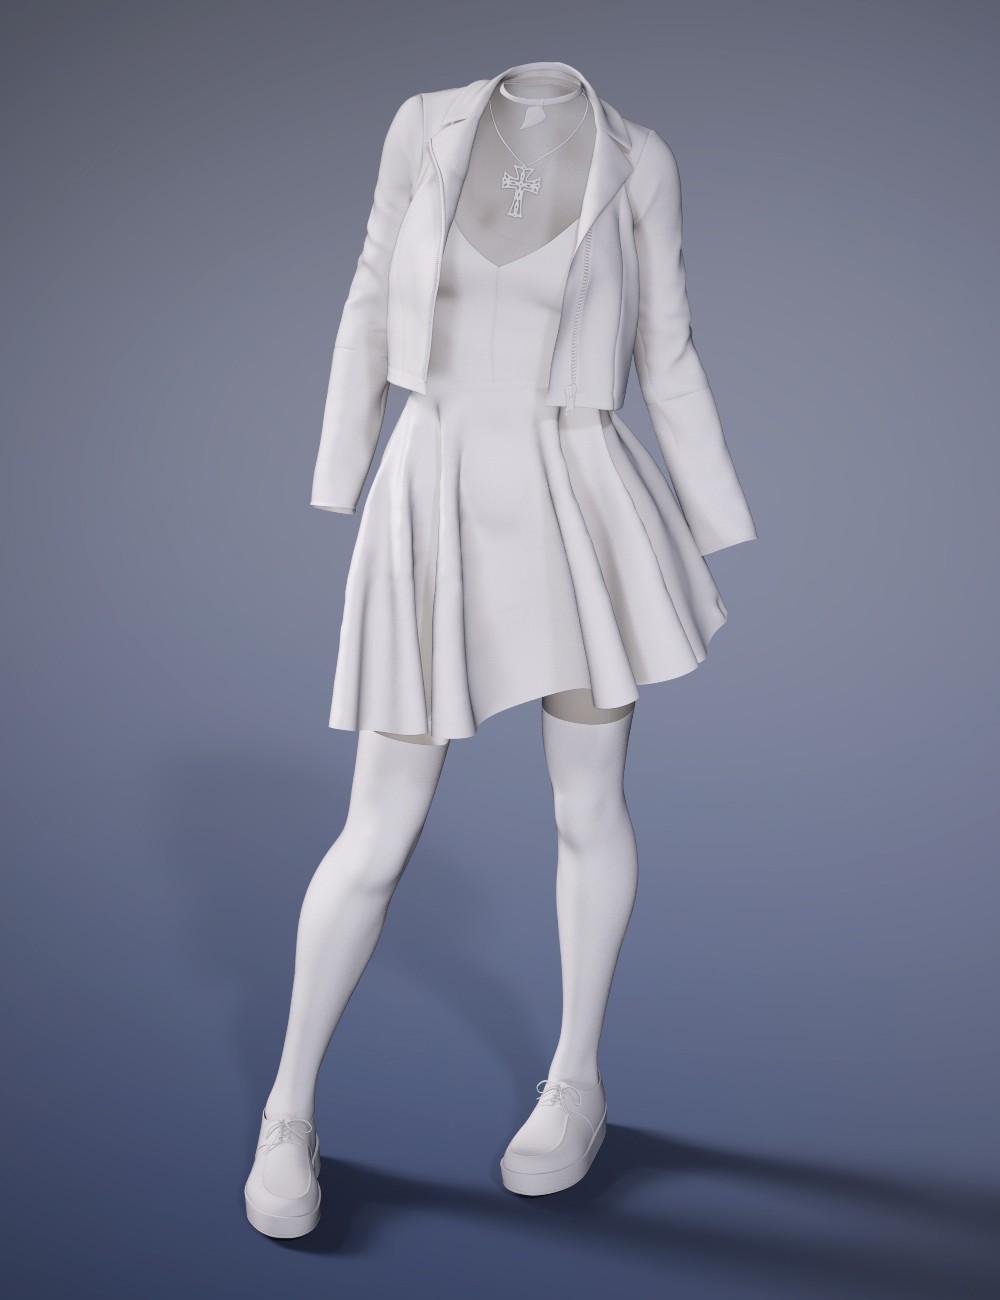 ArtStation - Pastel Goth Outfit for Genesis 8 Female